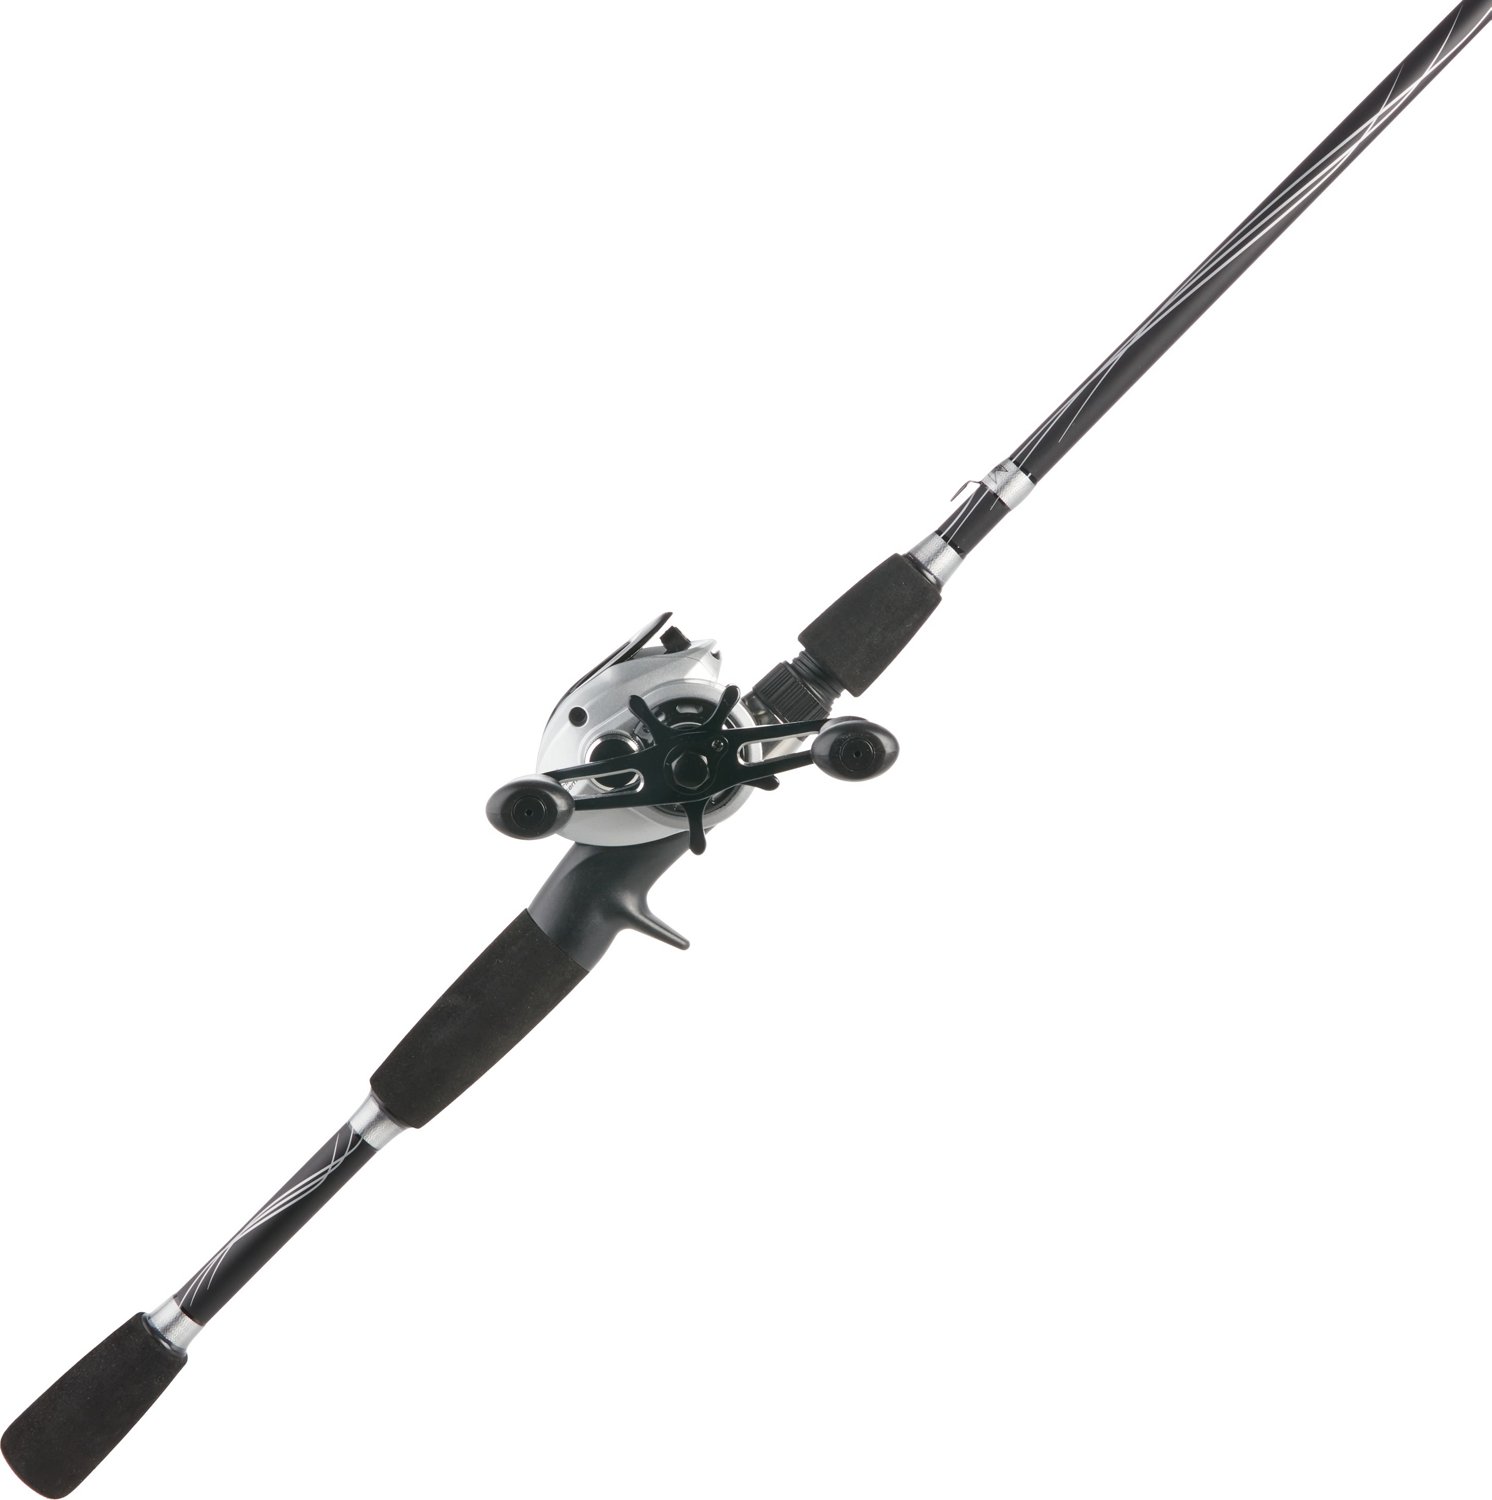 H2O XPRESS Blade Rod and Reel Combo